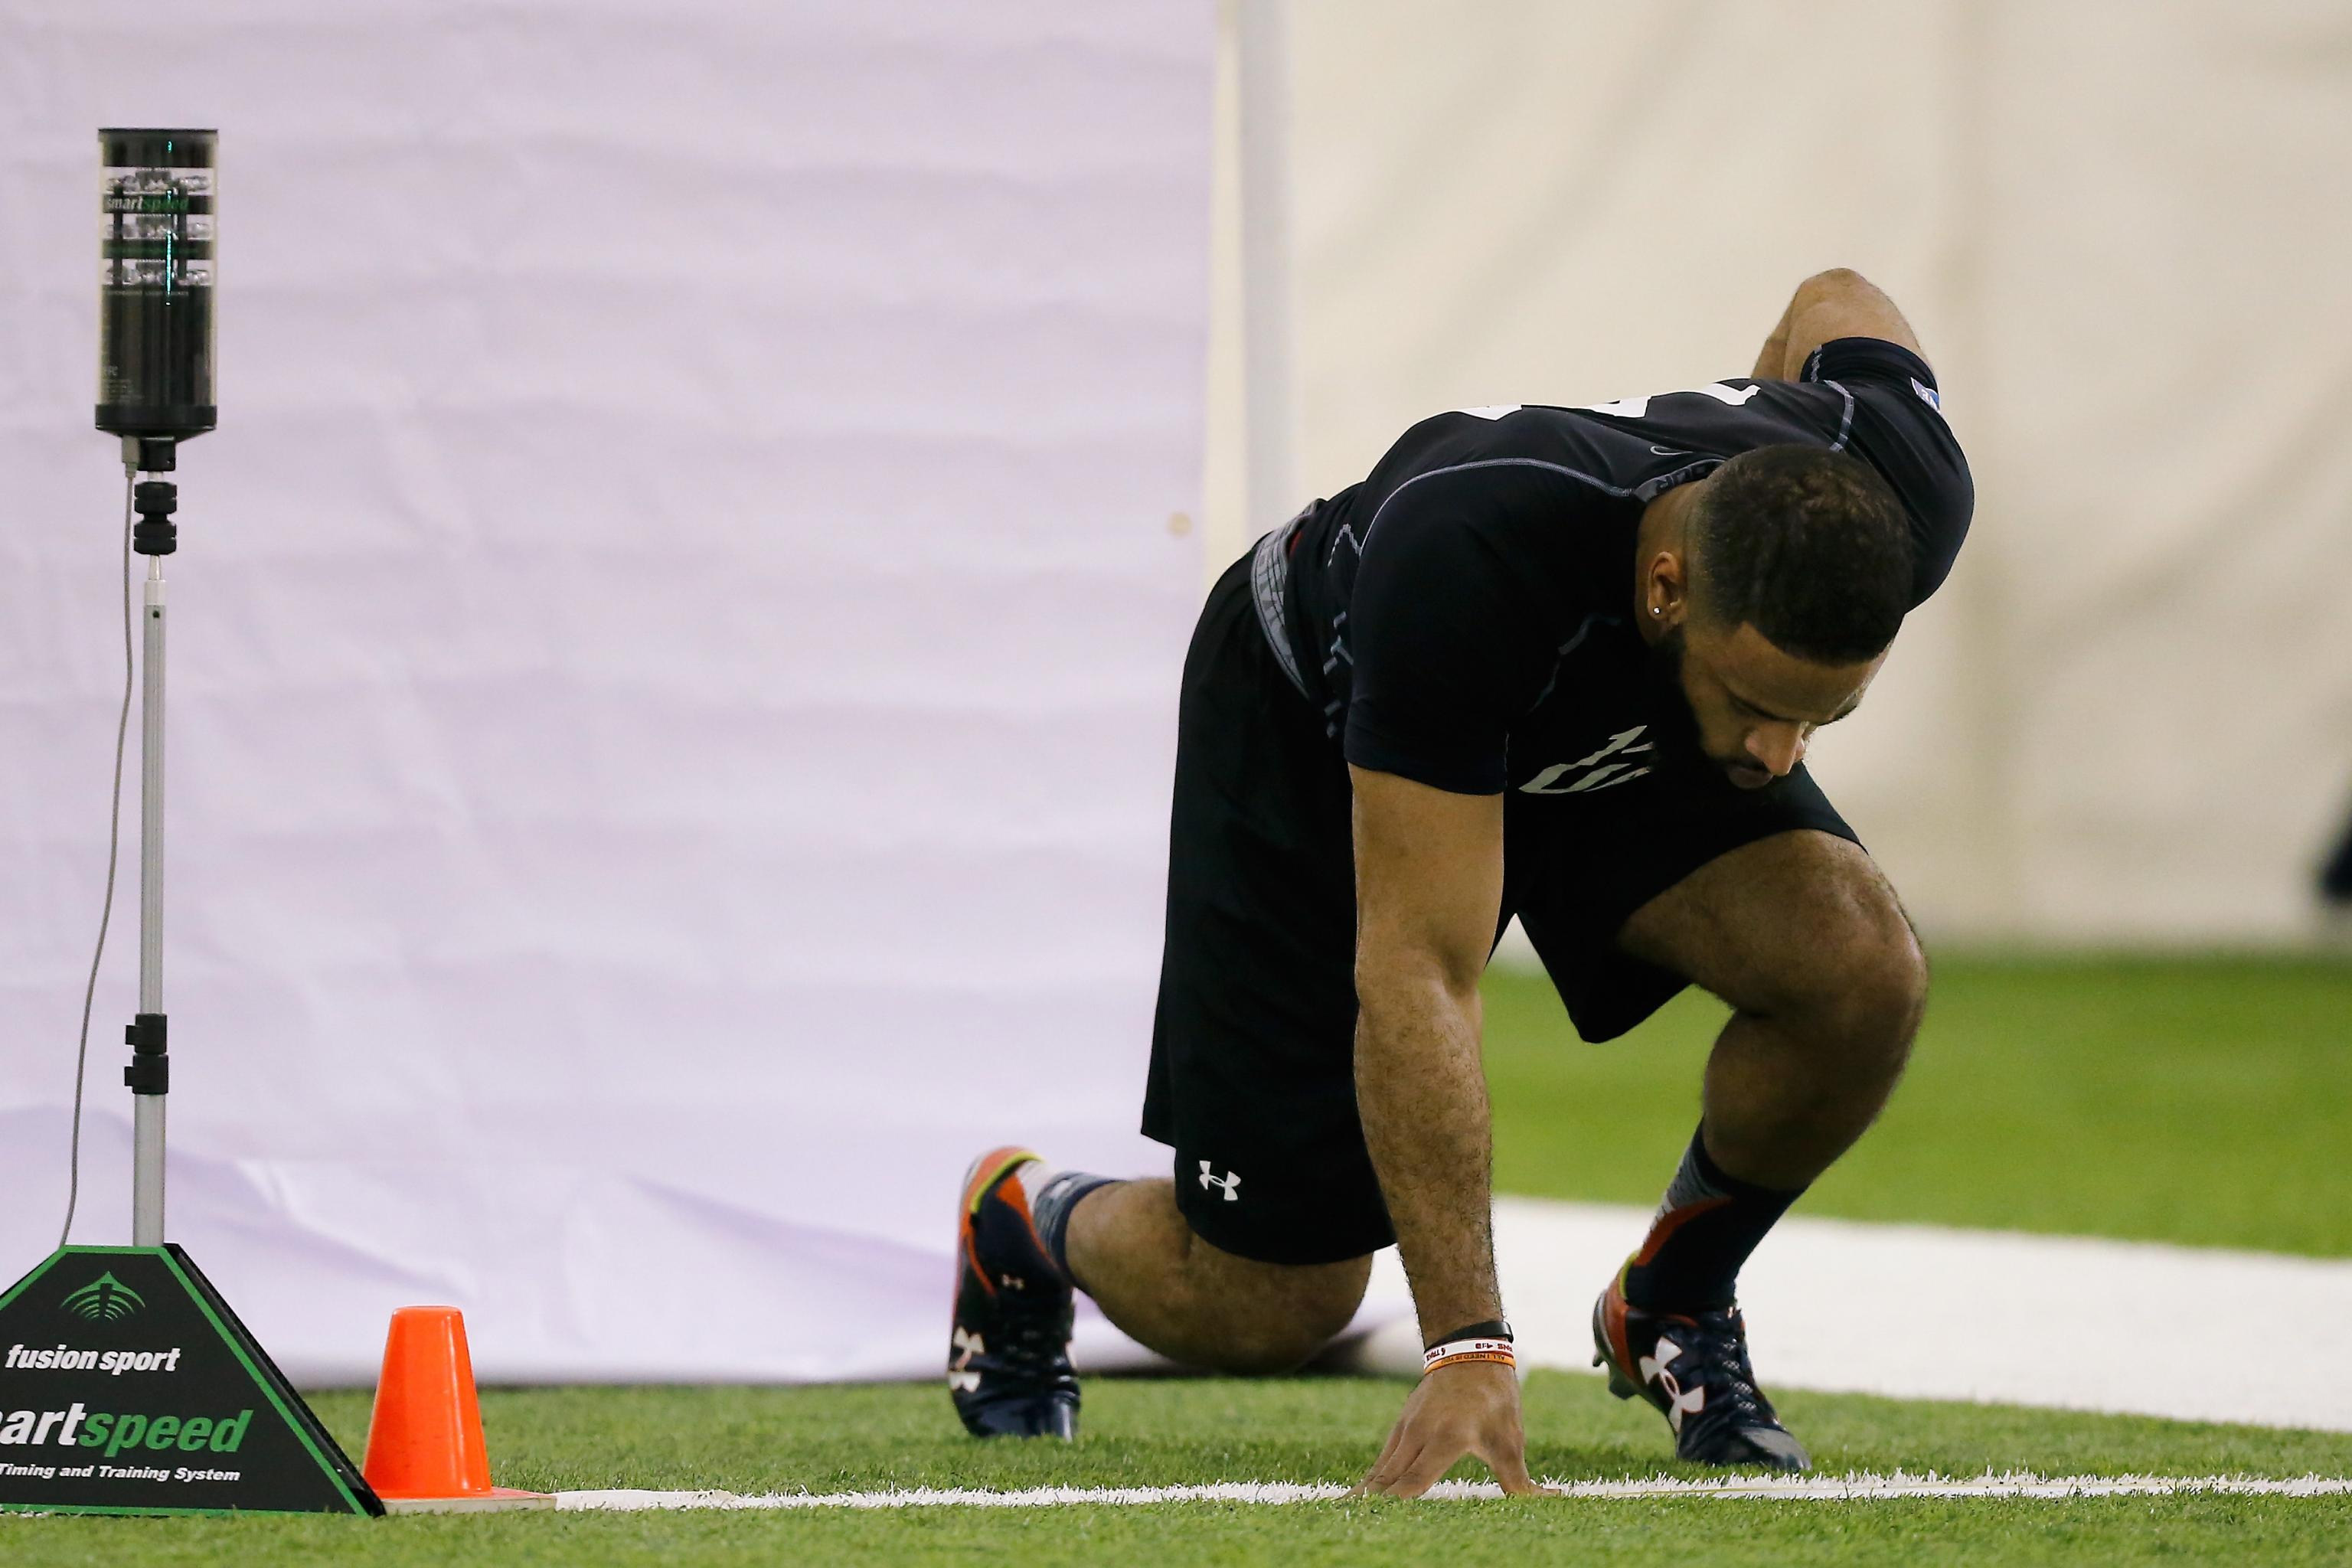 Why Do We Test the 40-Yard Dash at the Combine? - Elite FTS